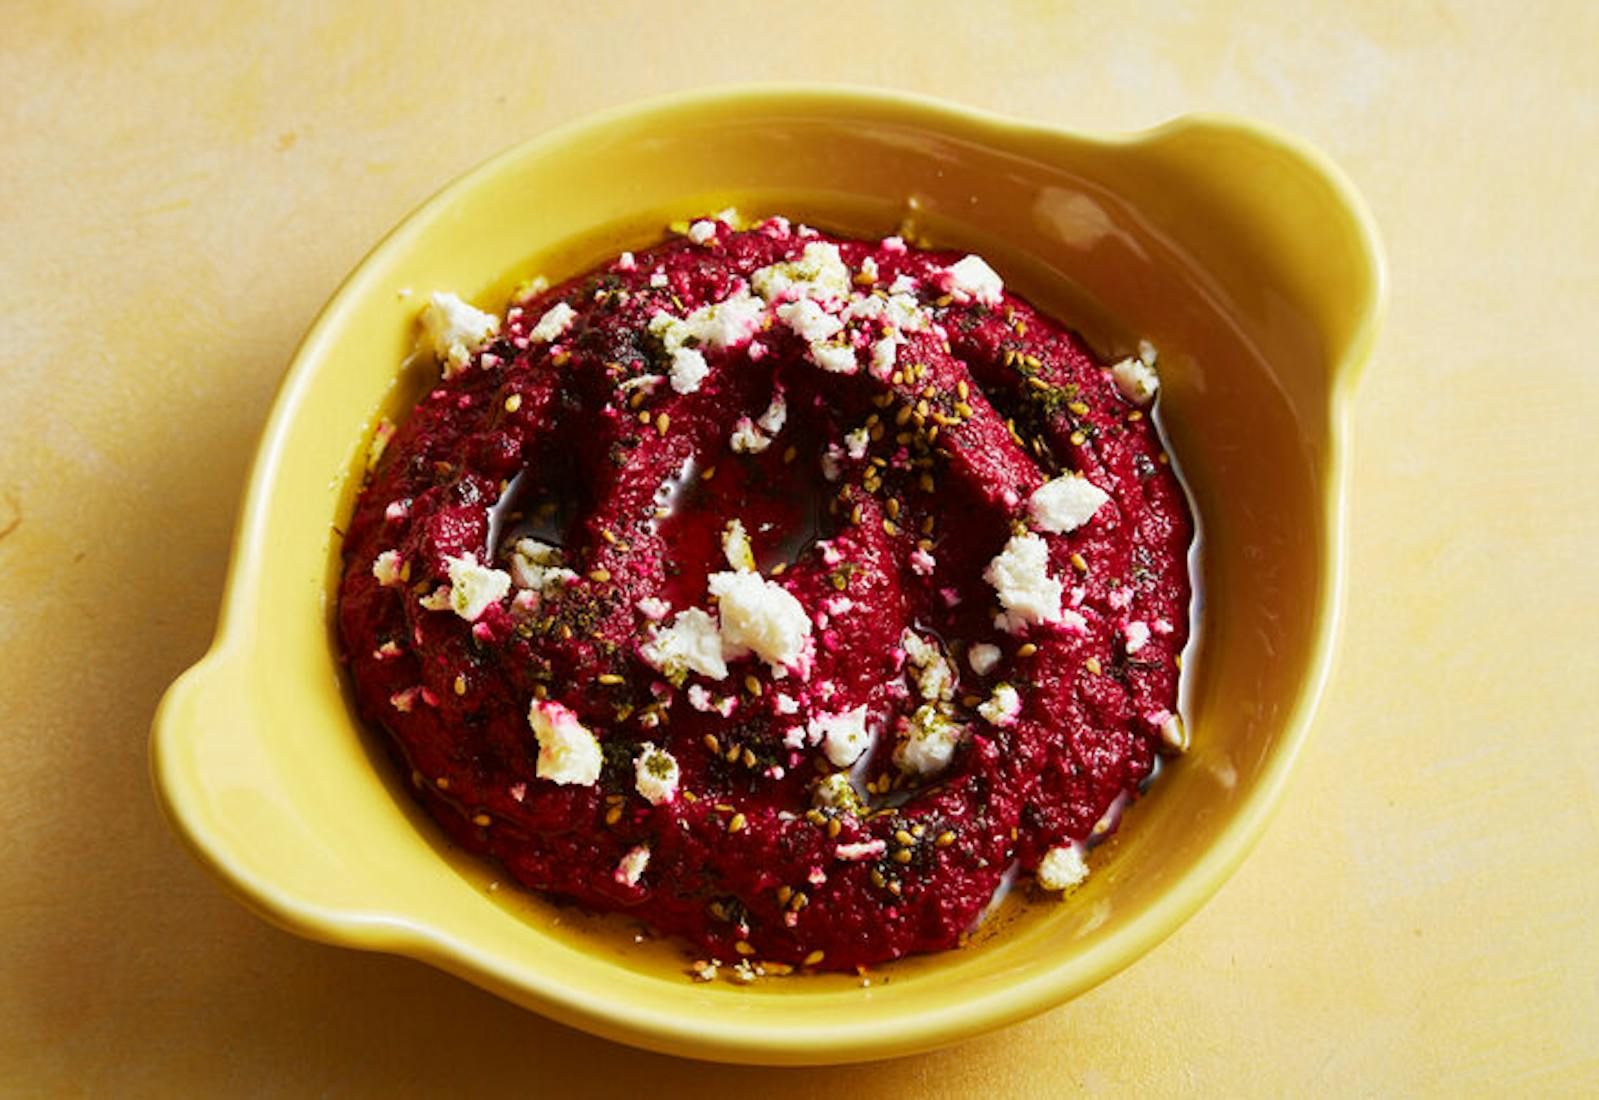 Spiced beet dip with crumbled feta in yellow dish atop yellow surface.